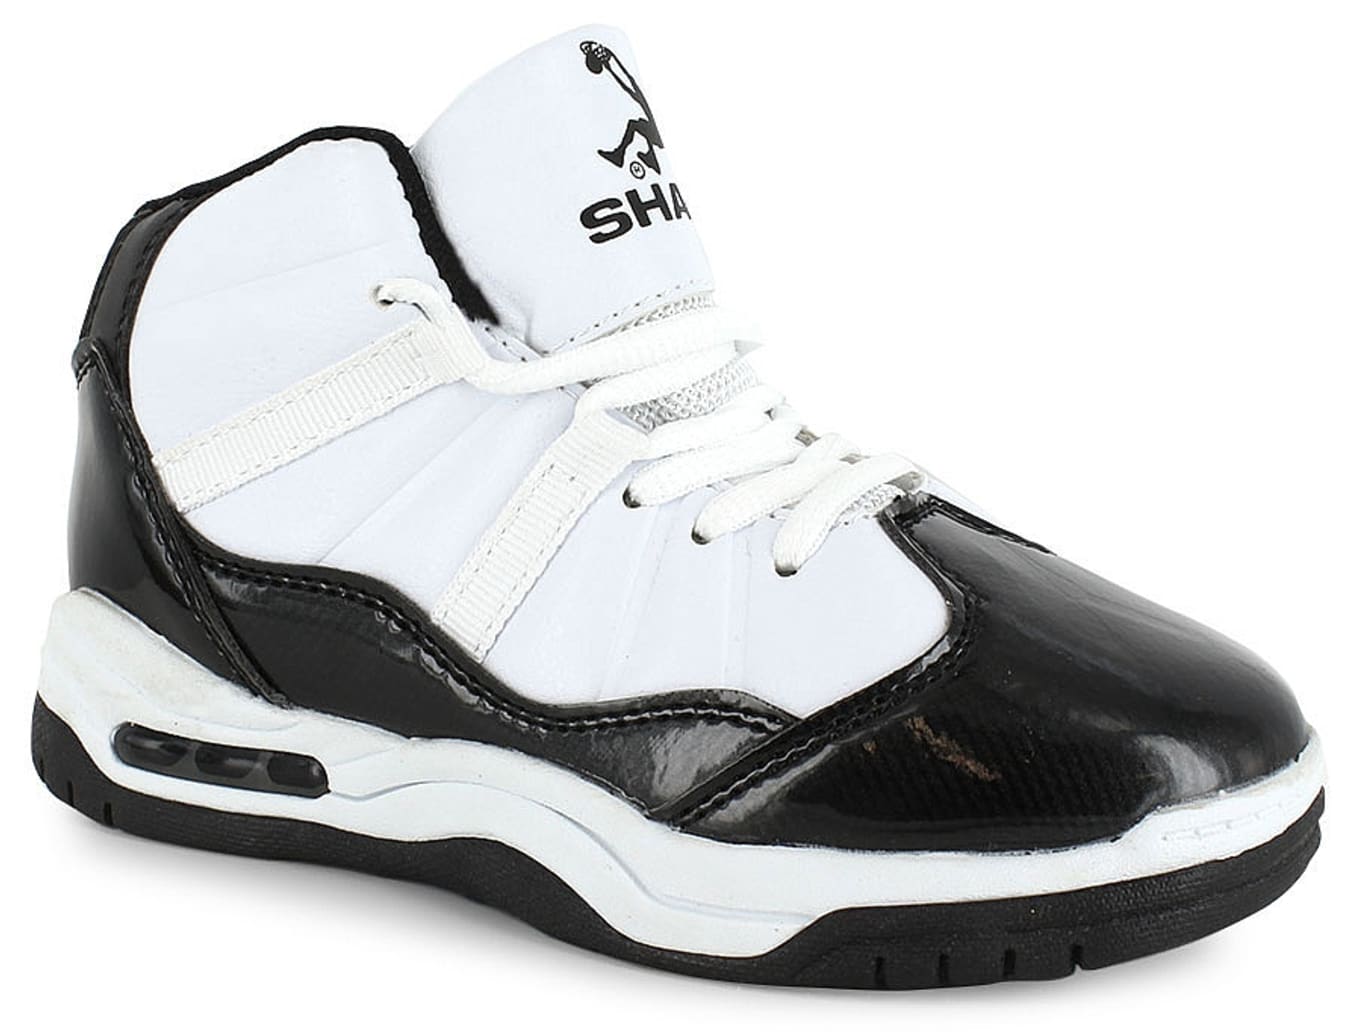 Most Flagrant Shaq Sneaker Knockoffs | Sole Collector